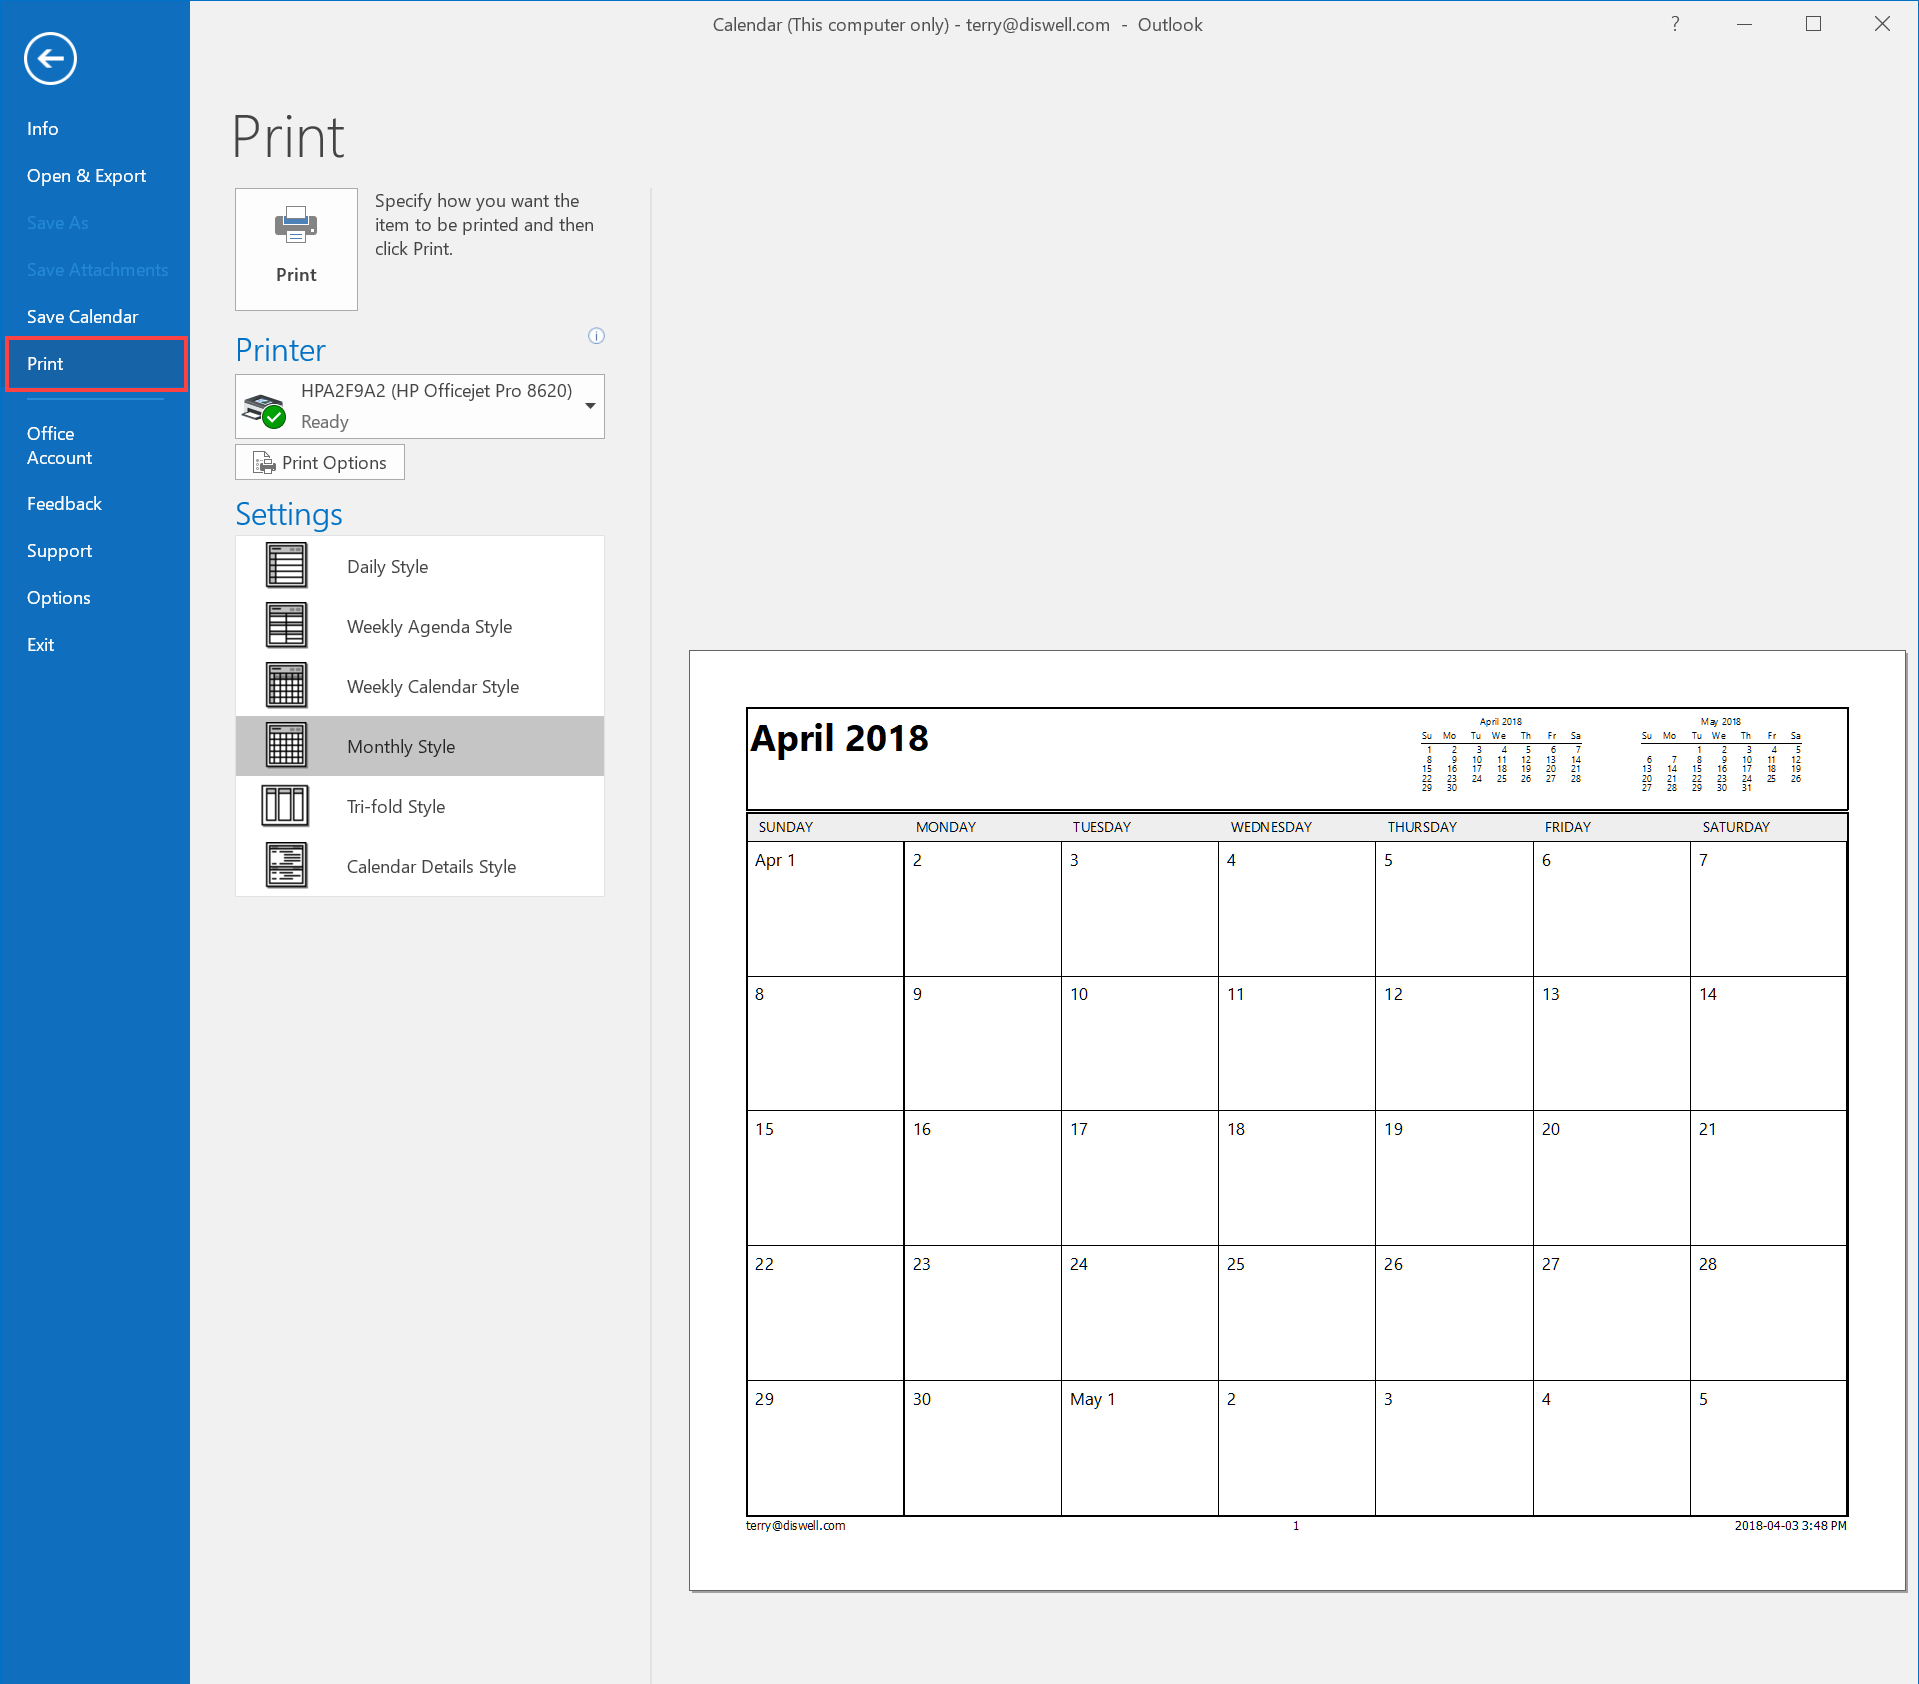 How To Email Or Print Your Calendar In Outlook 2016